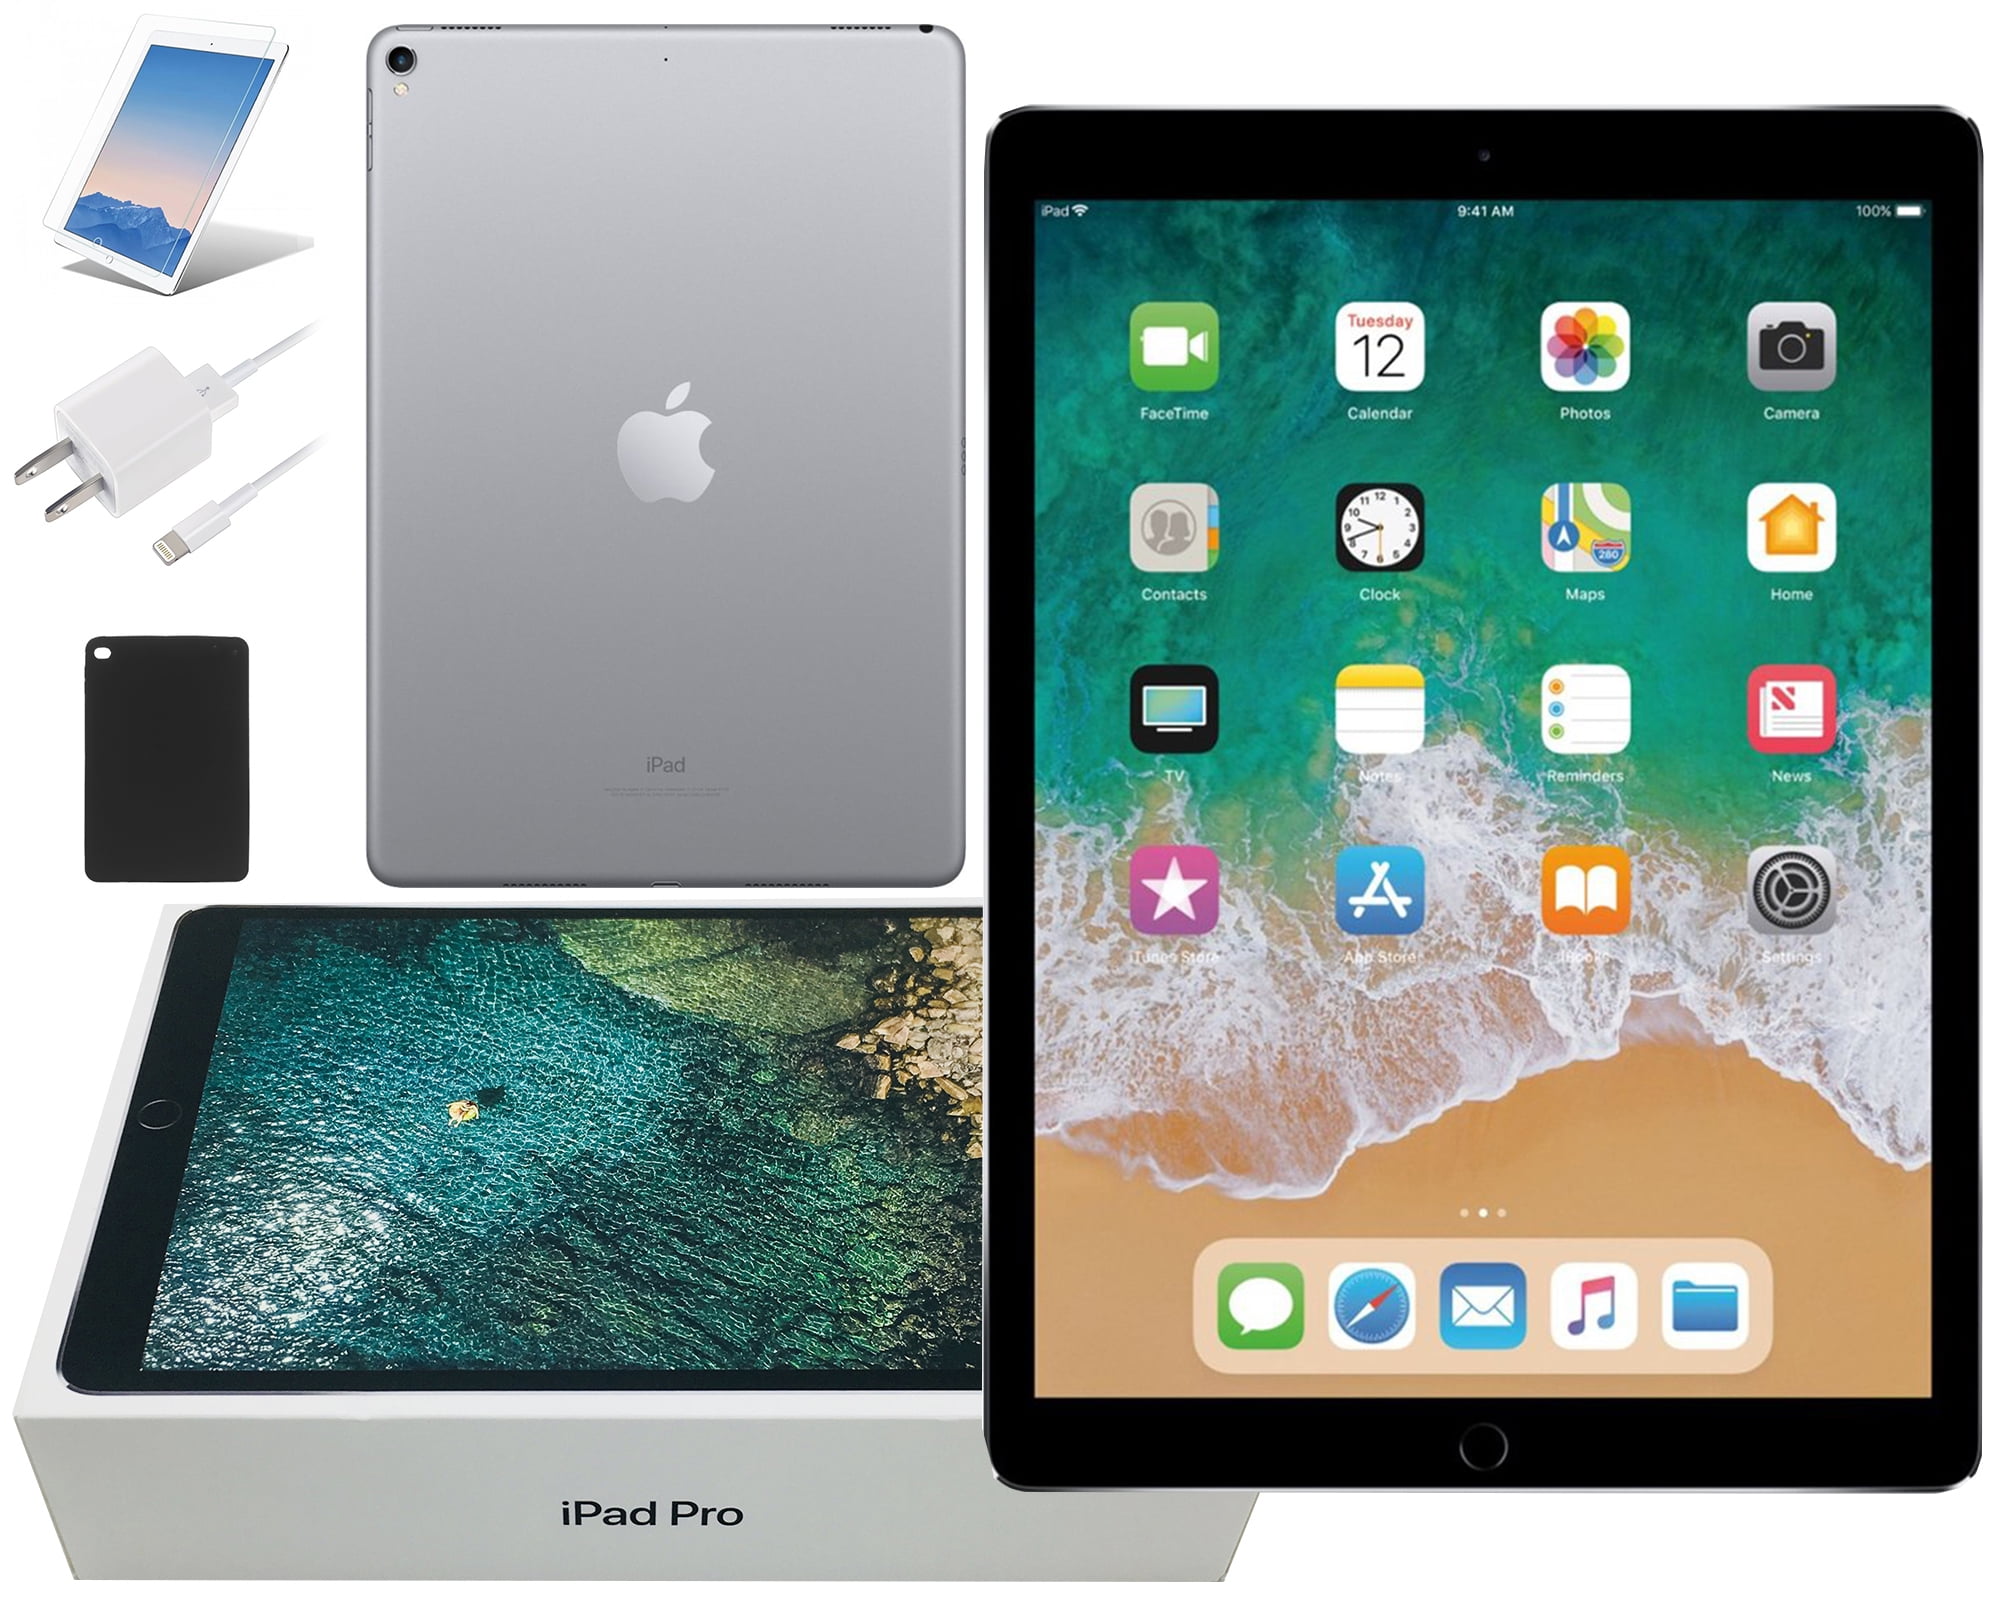 (Refurbished) Apple iPad Pro, 10.5-inch, 64GB, Wi-Fi Only, Comes with Bundle: Case, Tempered Glass, Rapid Charger - Space Gray/Silver Comes in Original Retail Box